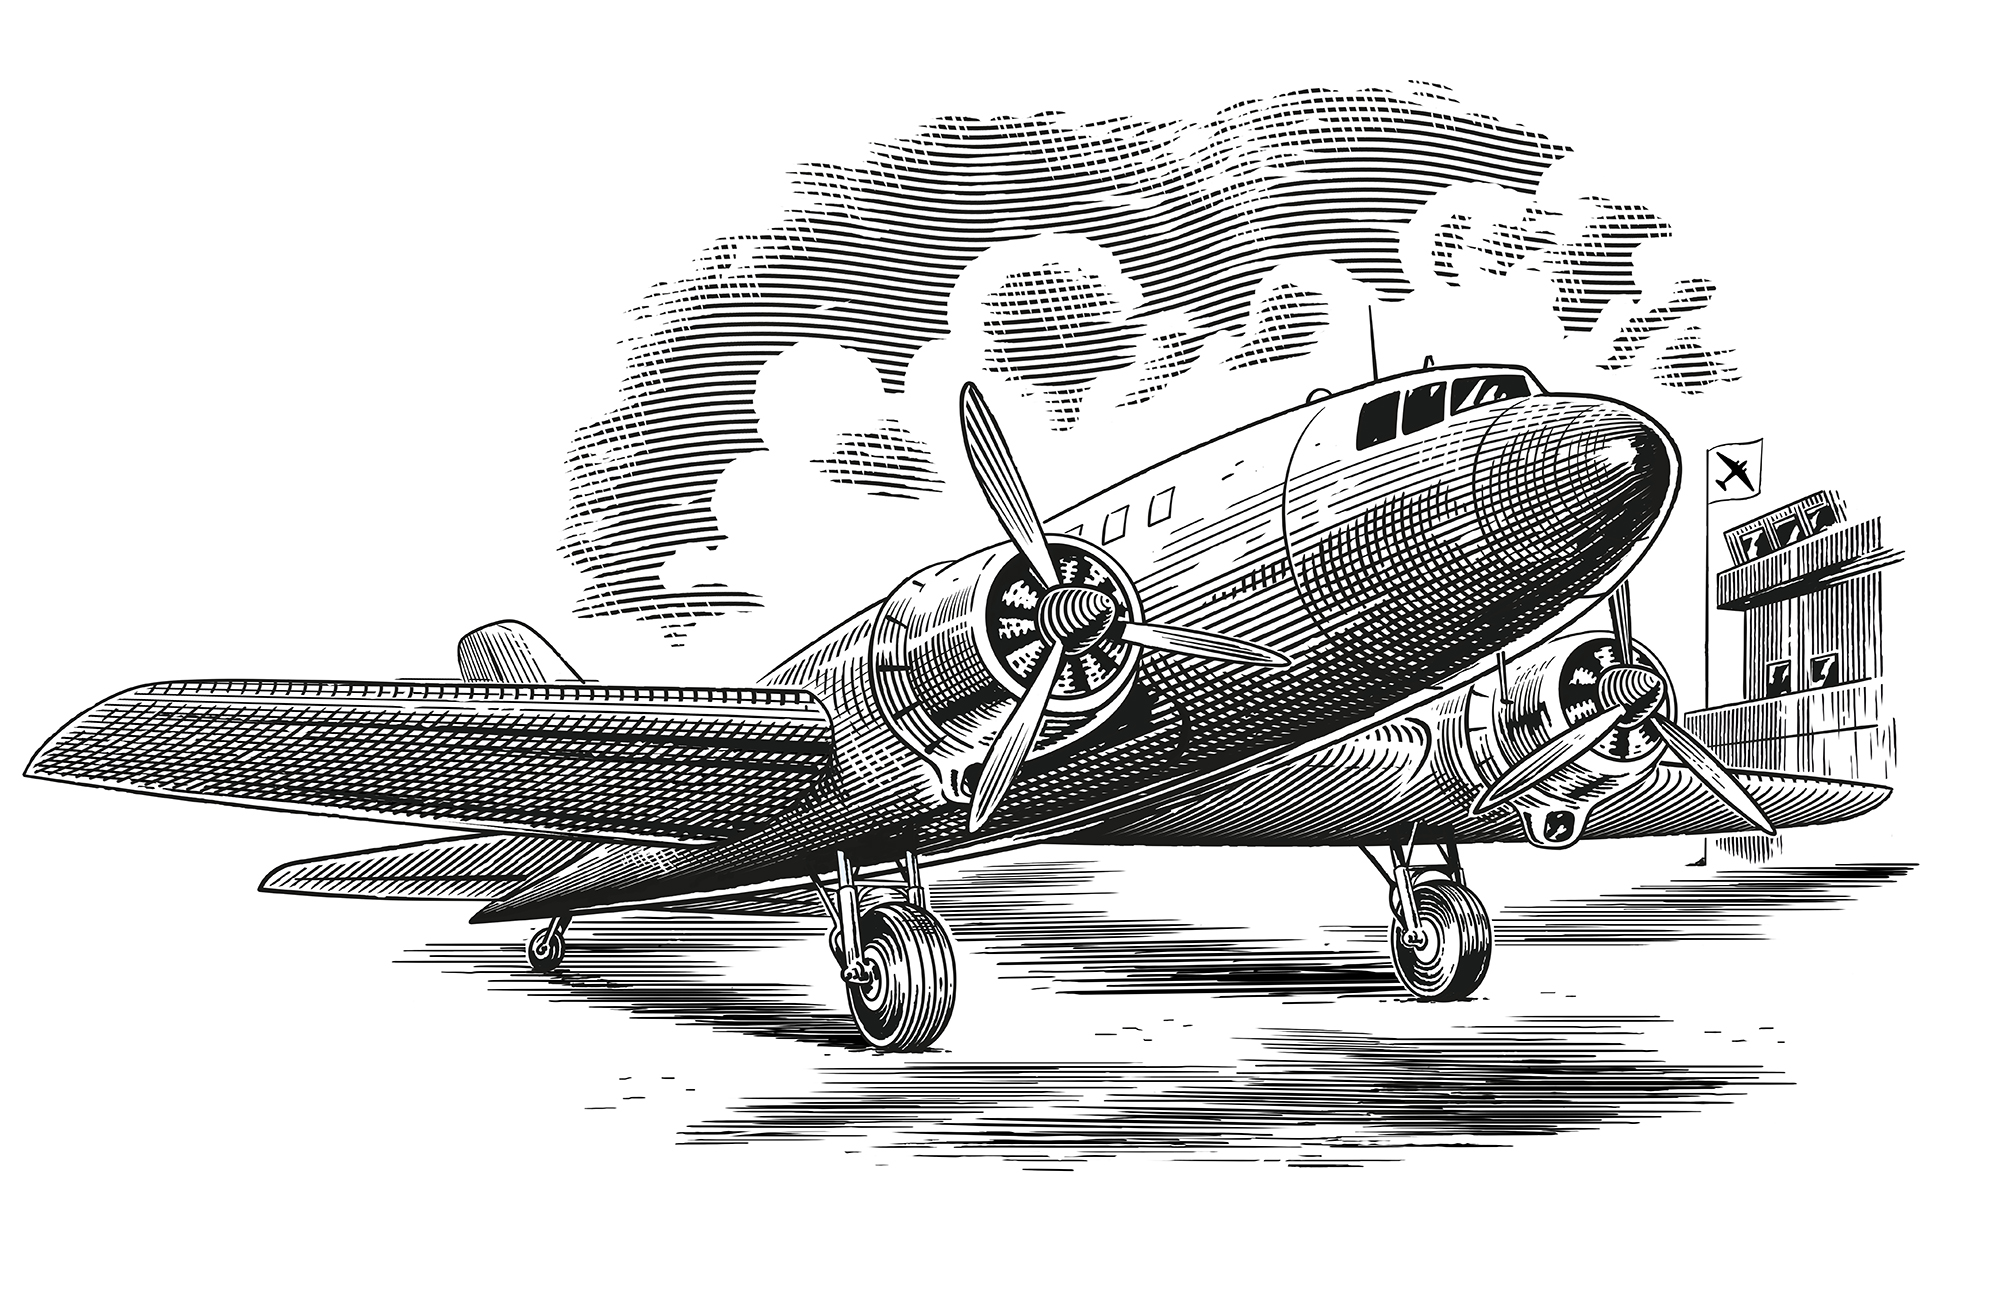 Illustration depicting an airplane at an airport executed in copper engraving style.